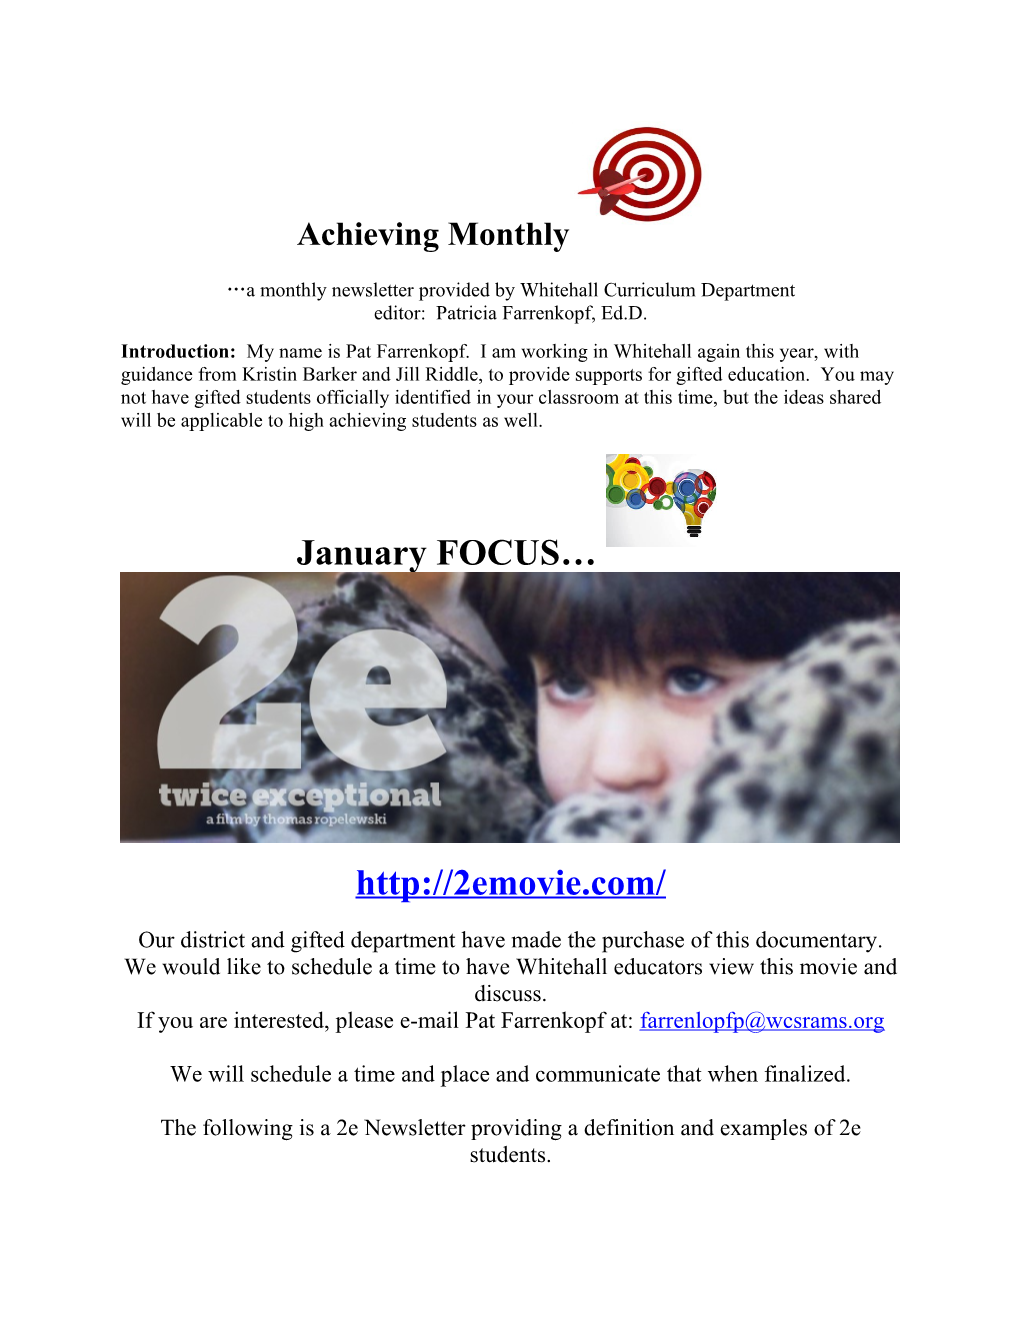 A Monthly Newsletter Provided by Whitehall Curriculum Department